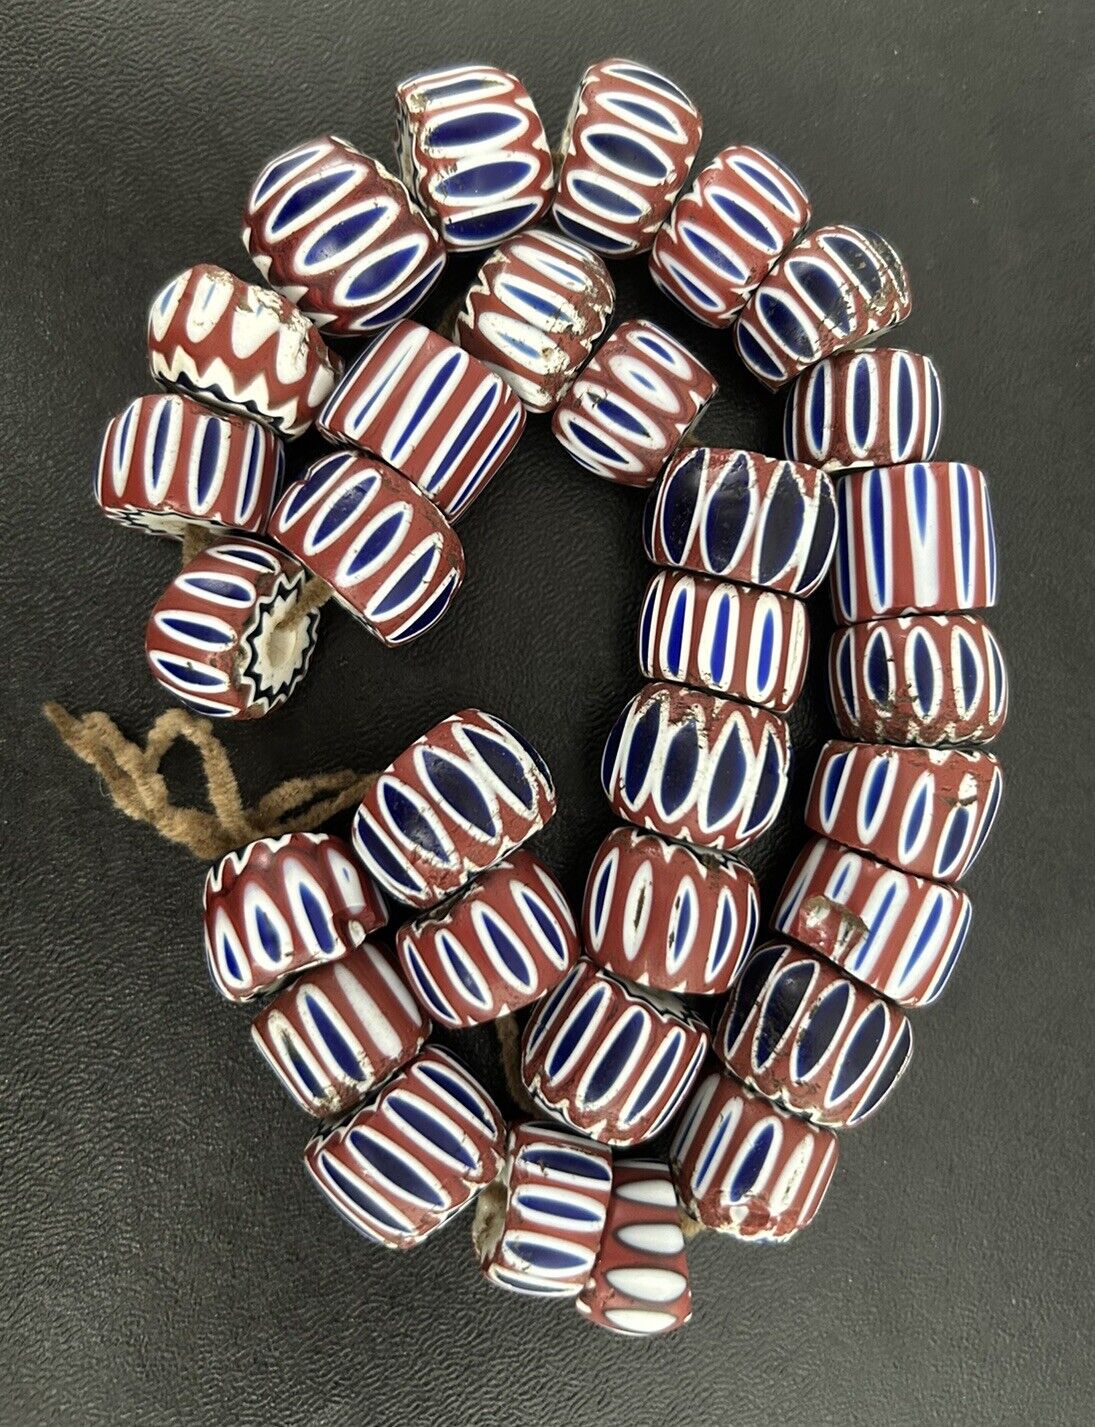 31 Large African Trade beads Vintage Venetian old glass Chevron Womens